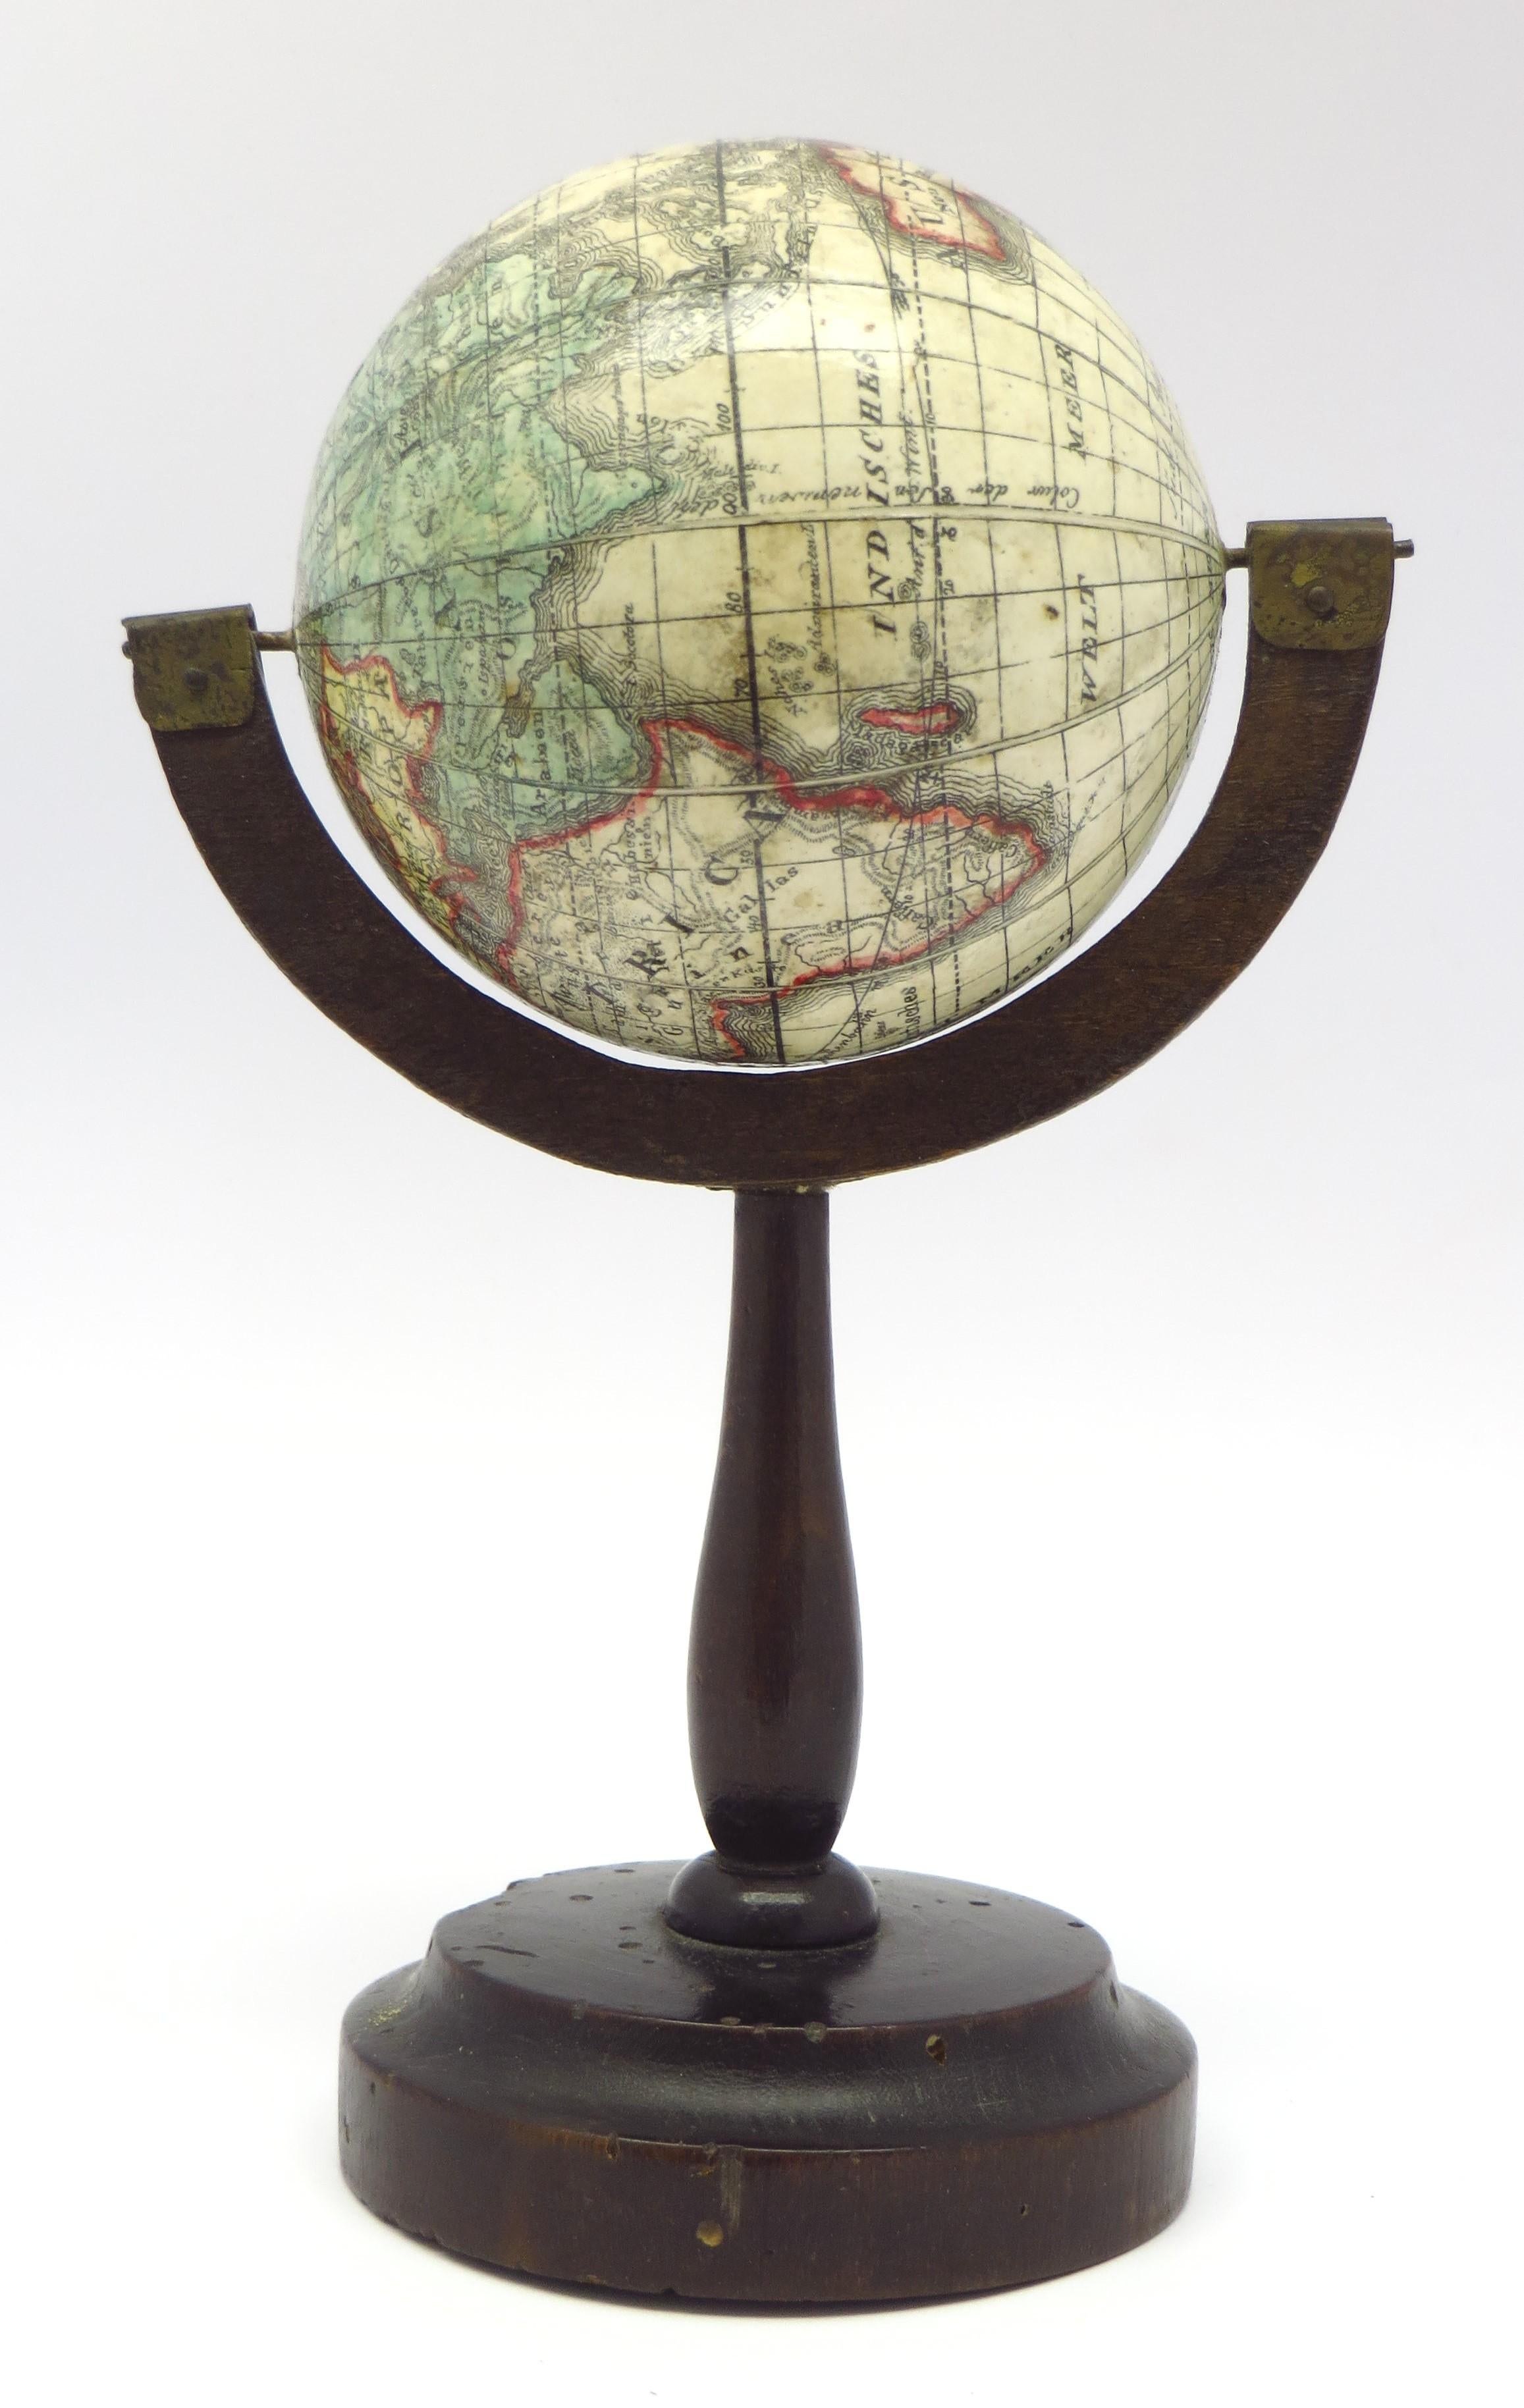 A rare pair of miniature terrestrial and celestial globes.

by K. Müller, 1822
Karlsruhe, Germany

Diameter globes: 7 cm. Total high: 14,5 cm. 

Each with 12 hand-coloured engraved paper gores, over a 